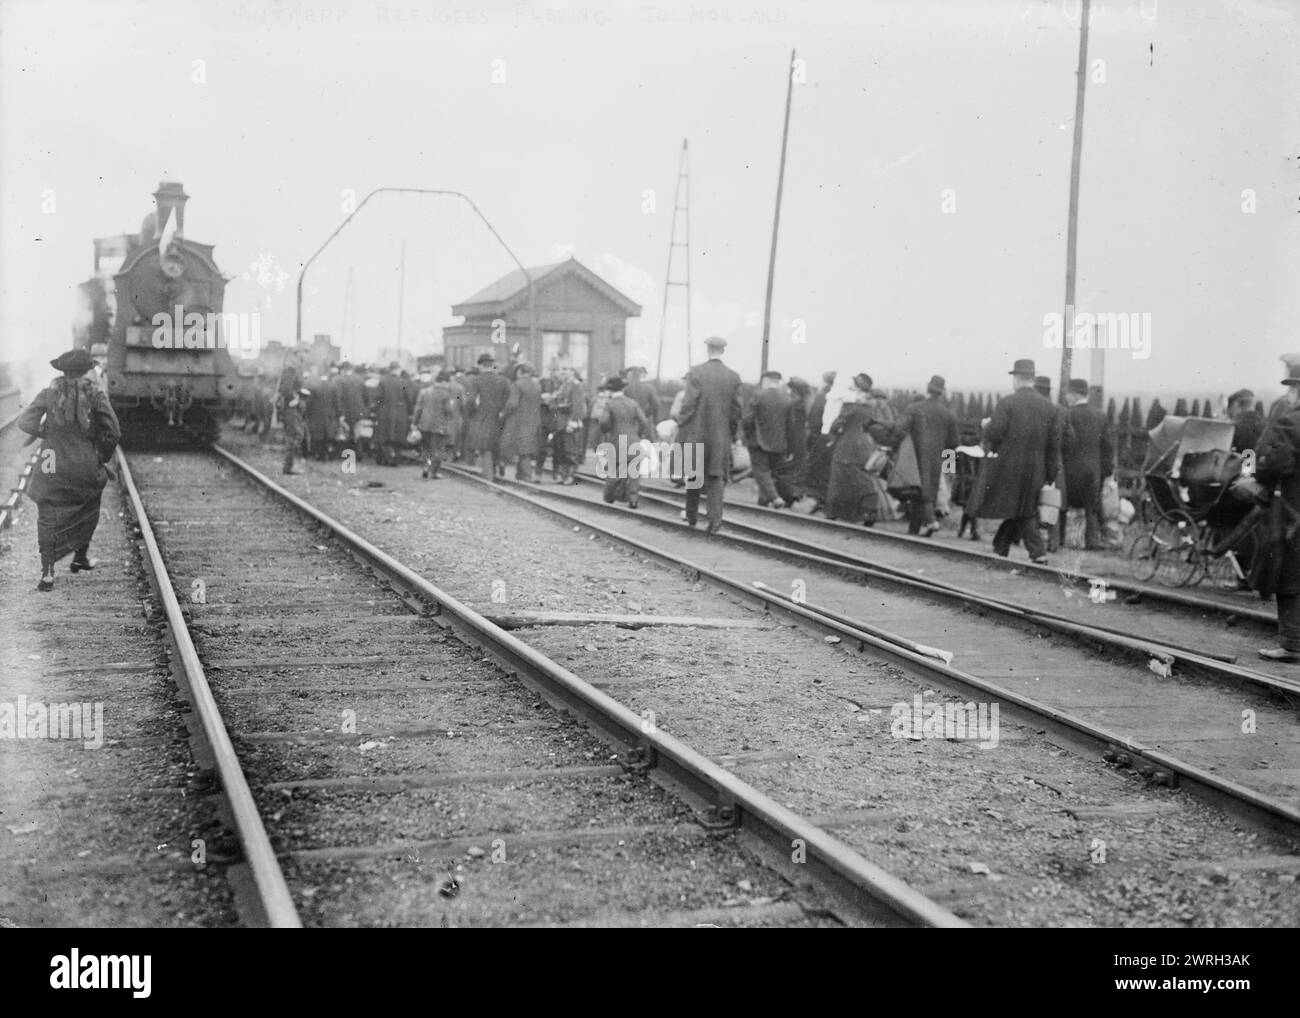 Antwerp refugees fleeing to Holland, 1914. Shows refugees walking on railroad tracks on way to Holland during World War I. Stock Photo